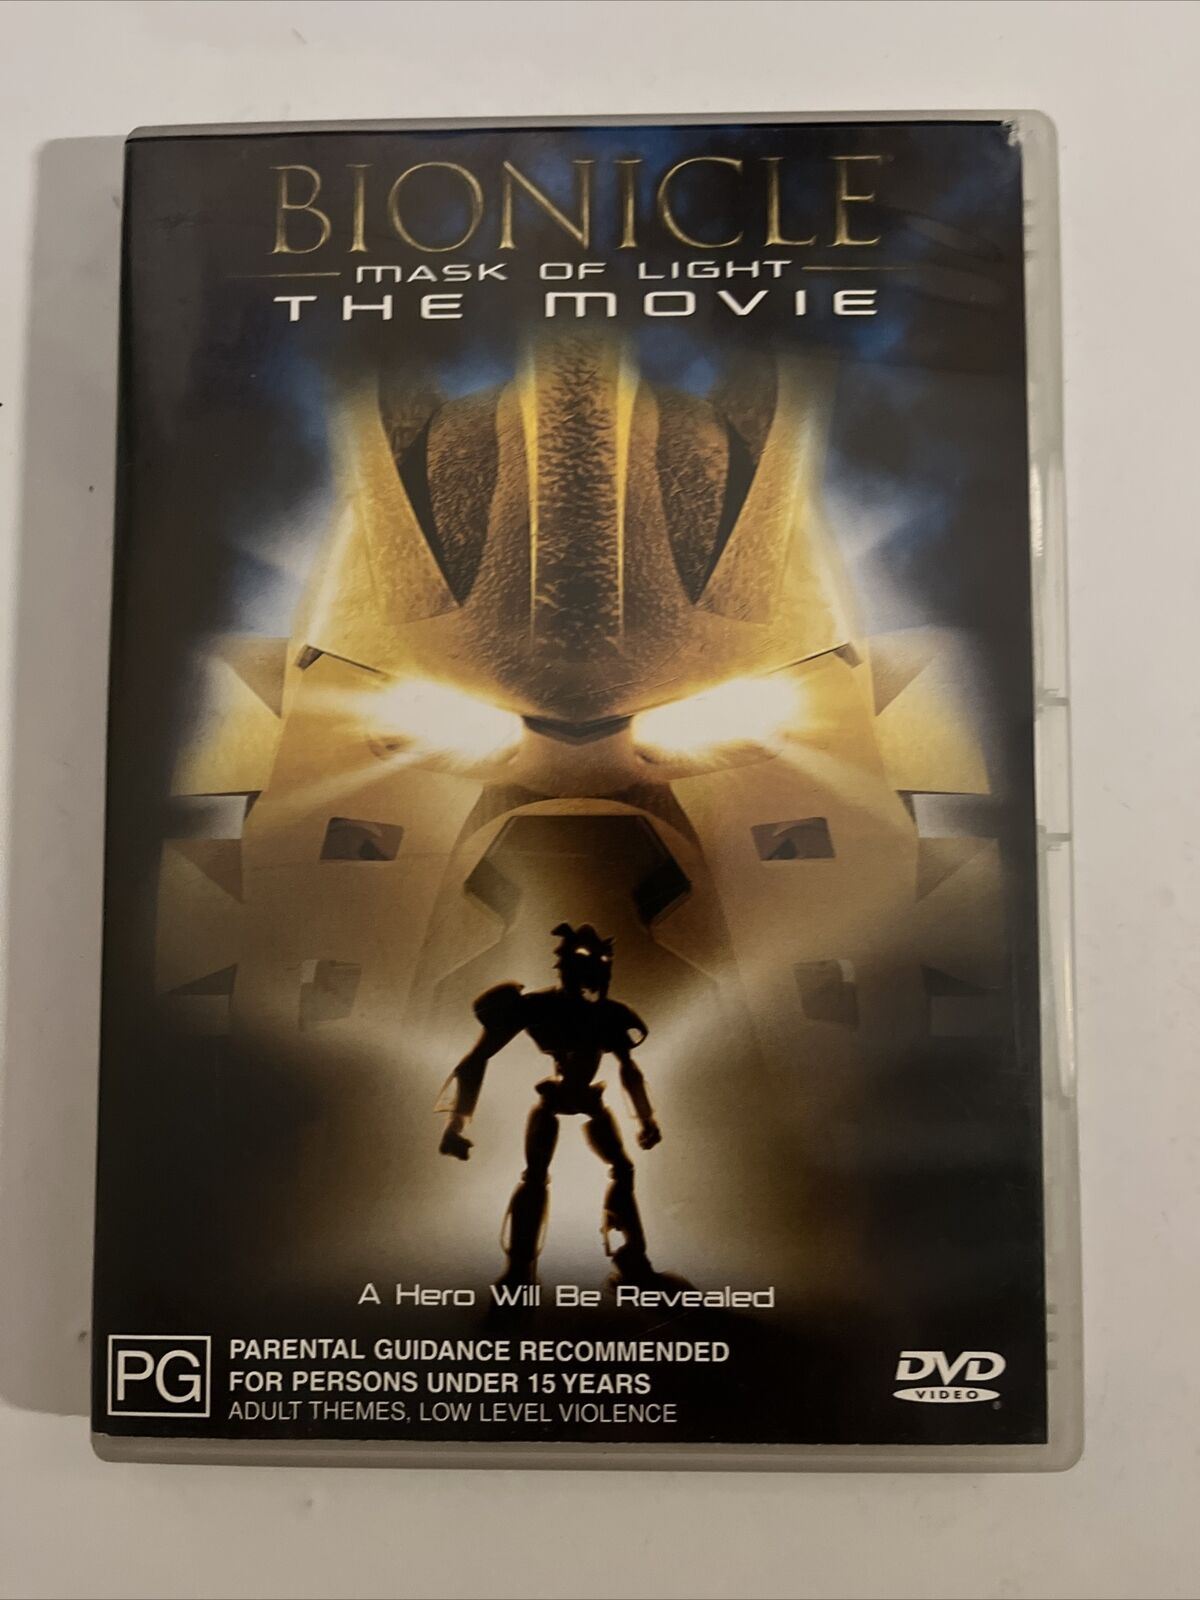 Bionicle: Mask of Light - The Movie (DVD, 2003) Region 4